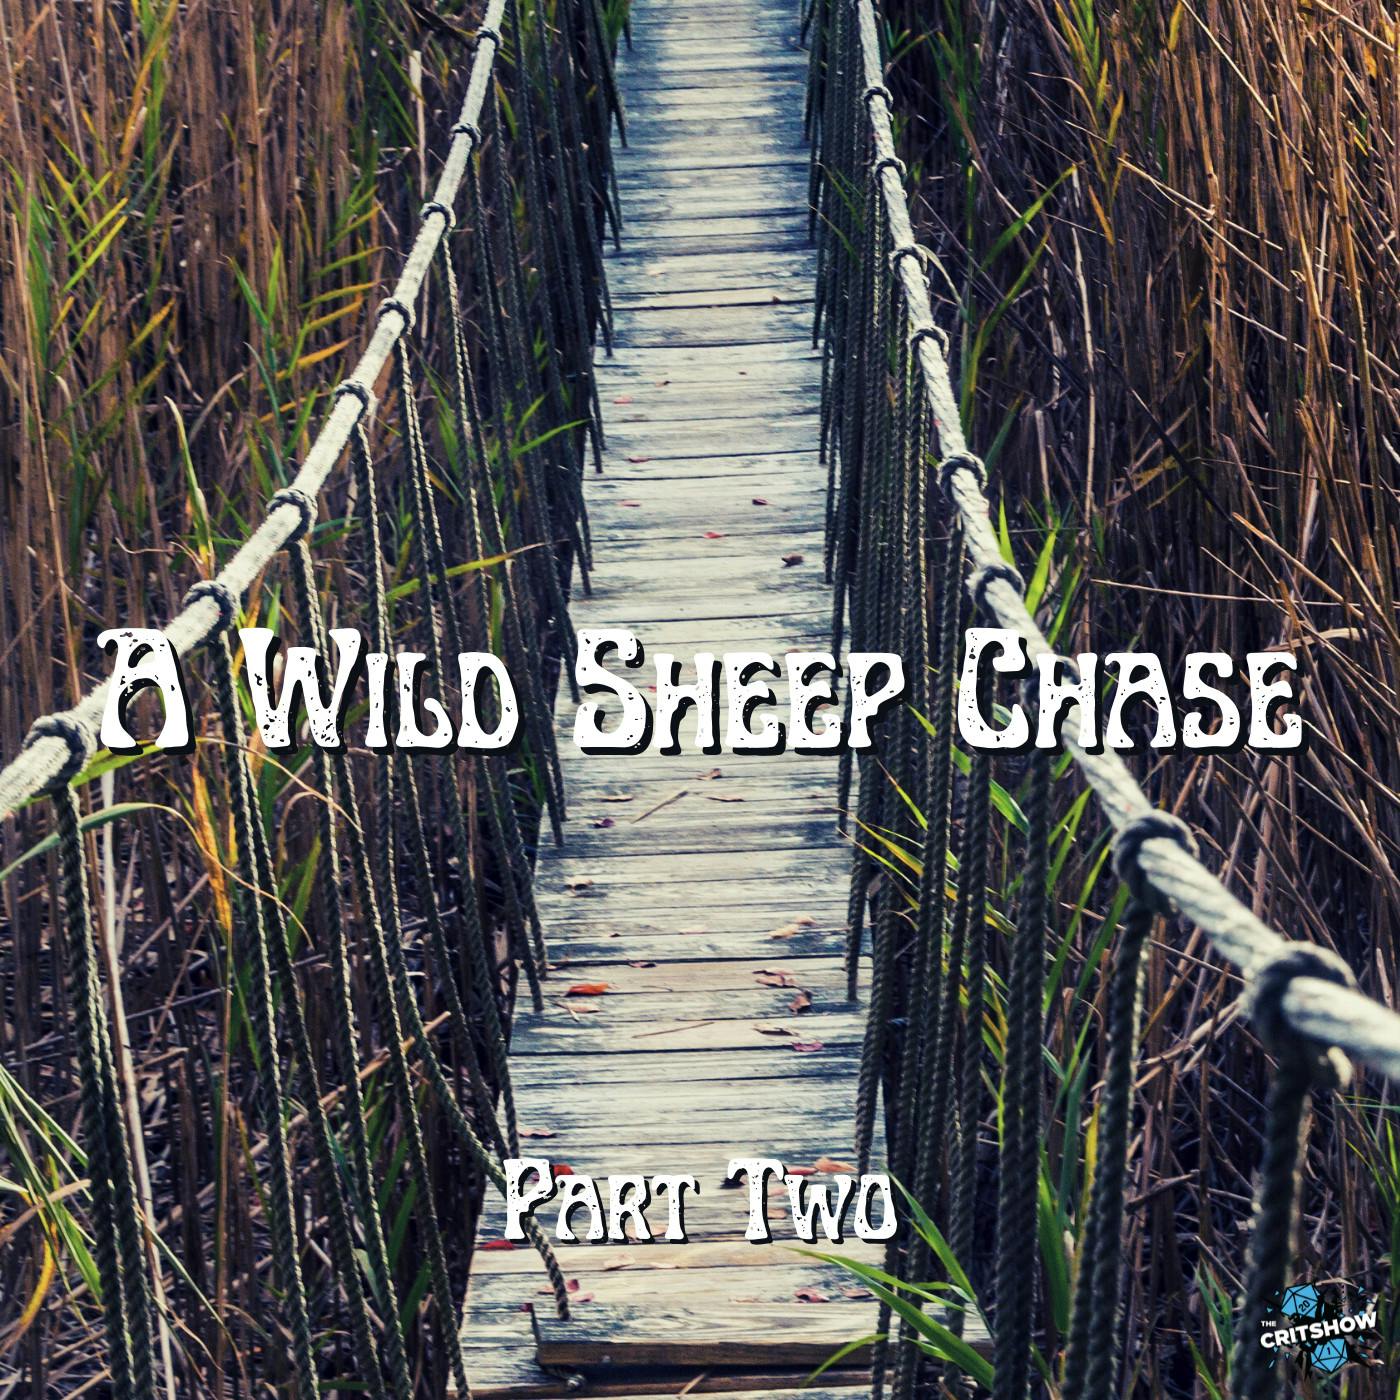 The Critshow: A Wild Sheep Chase (Part 2)